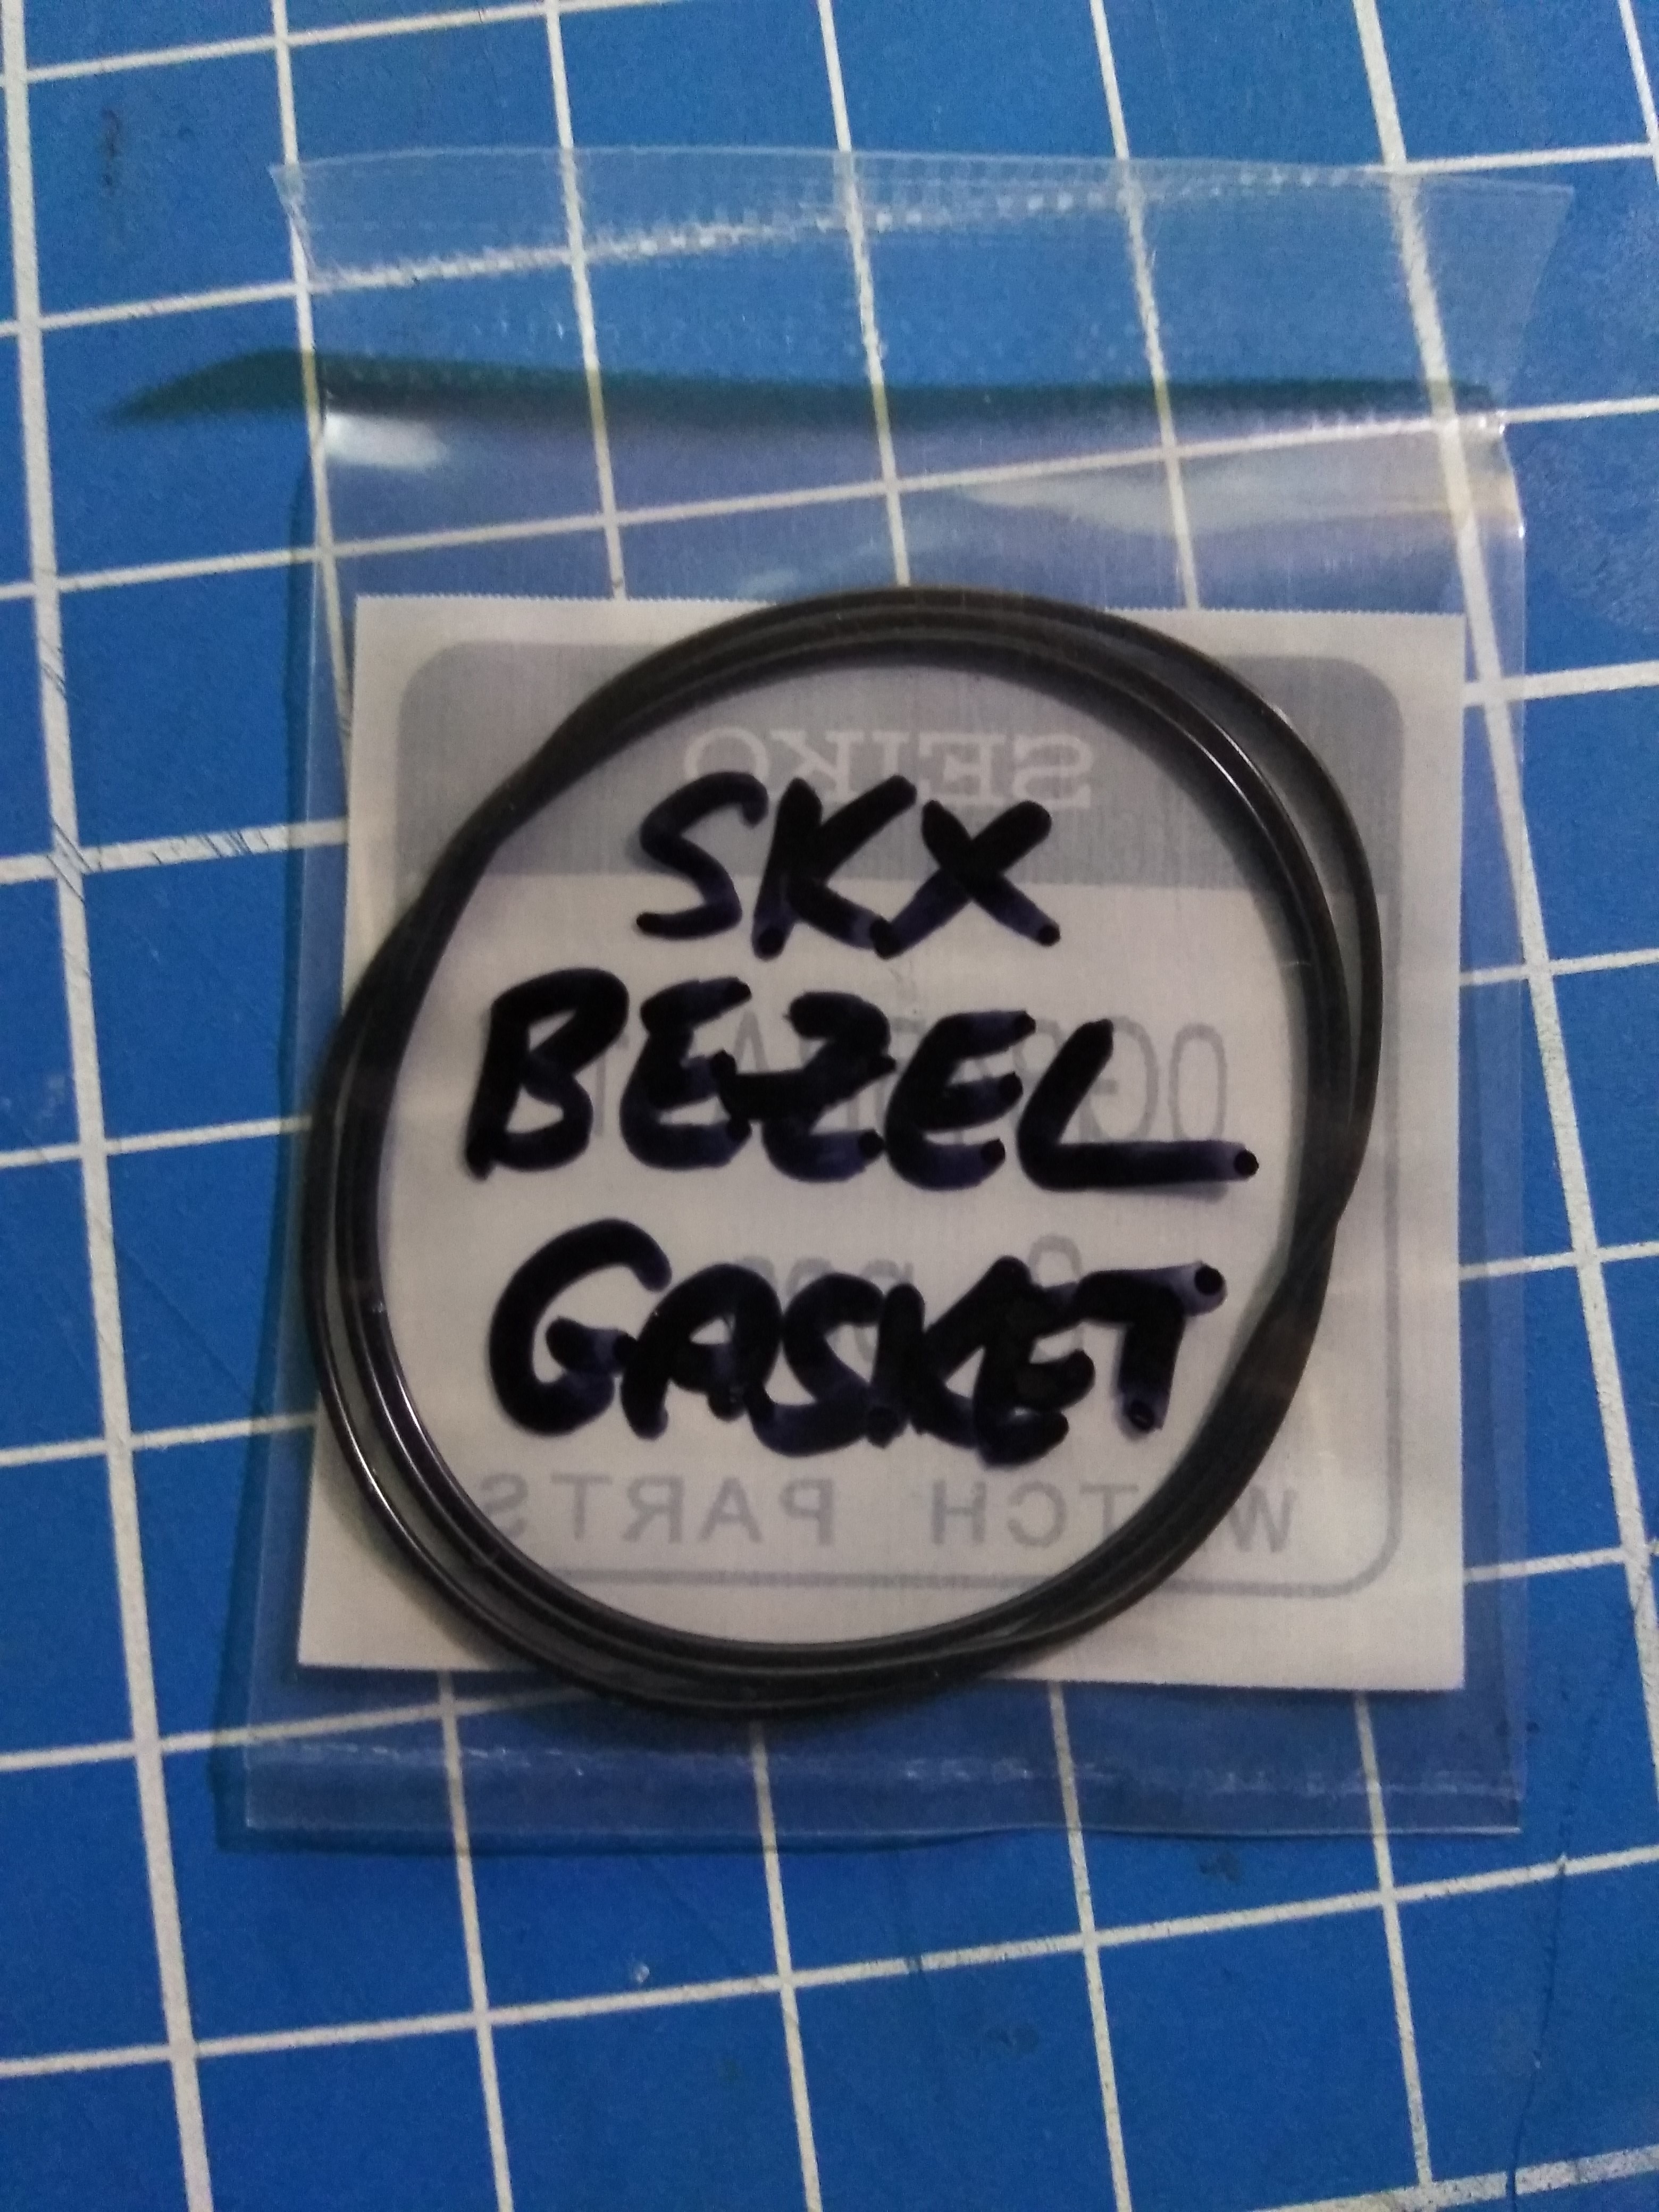 Bezel Gasket Washer Ring fir SKX007,... 7s26-0020 Divers only, Mobile & Gadgets, Wearables & Watches on Carousell